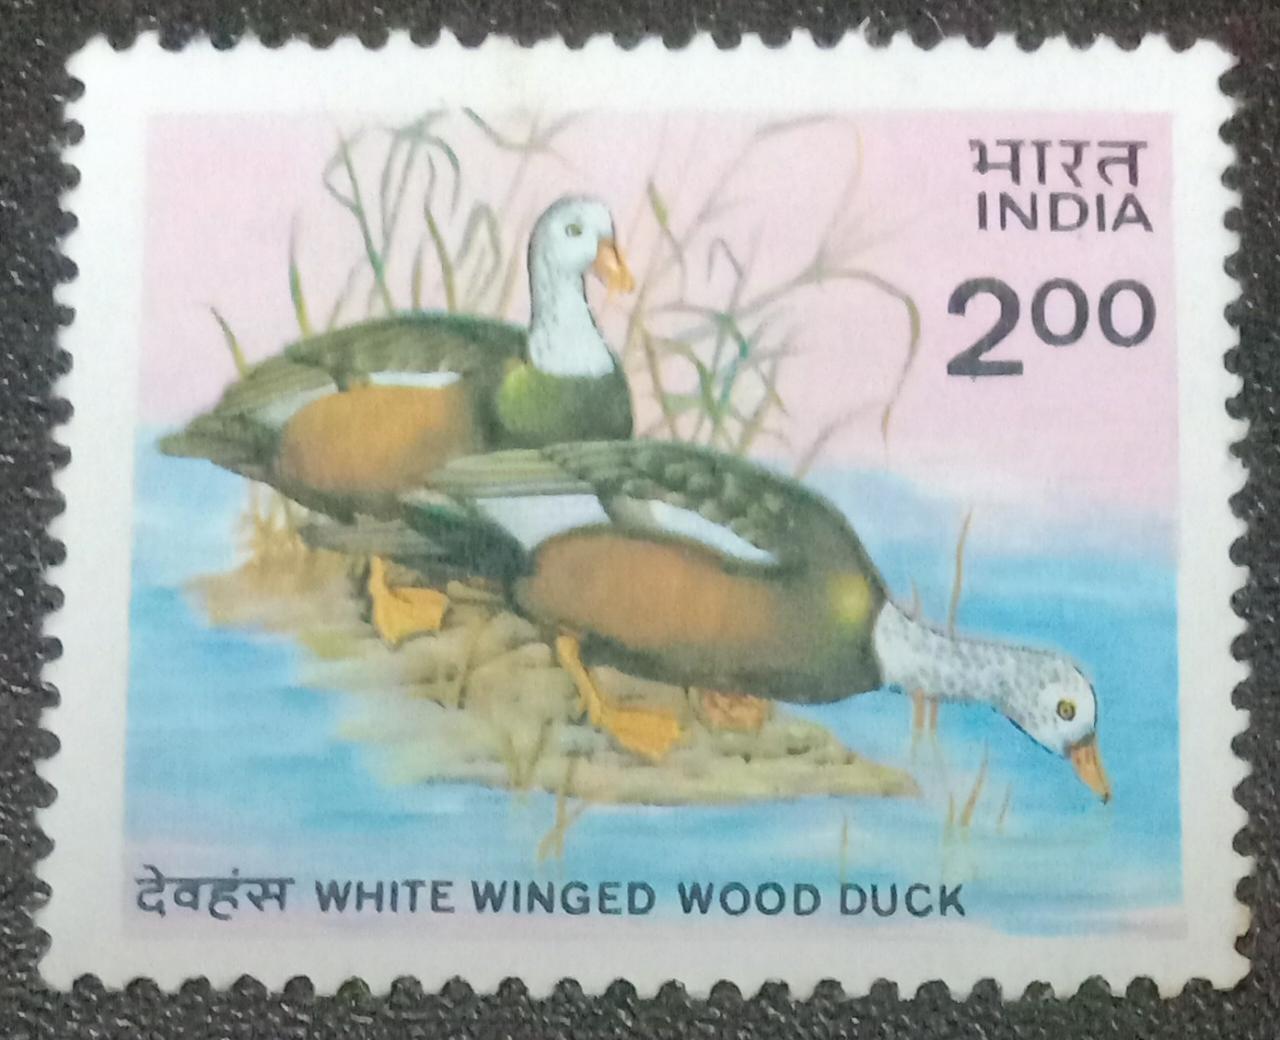 India Mint-1985 Wildlife Conservation -White Winged Wood Duck.